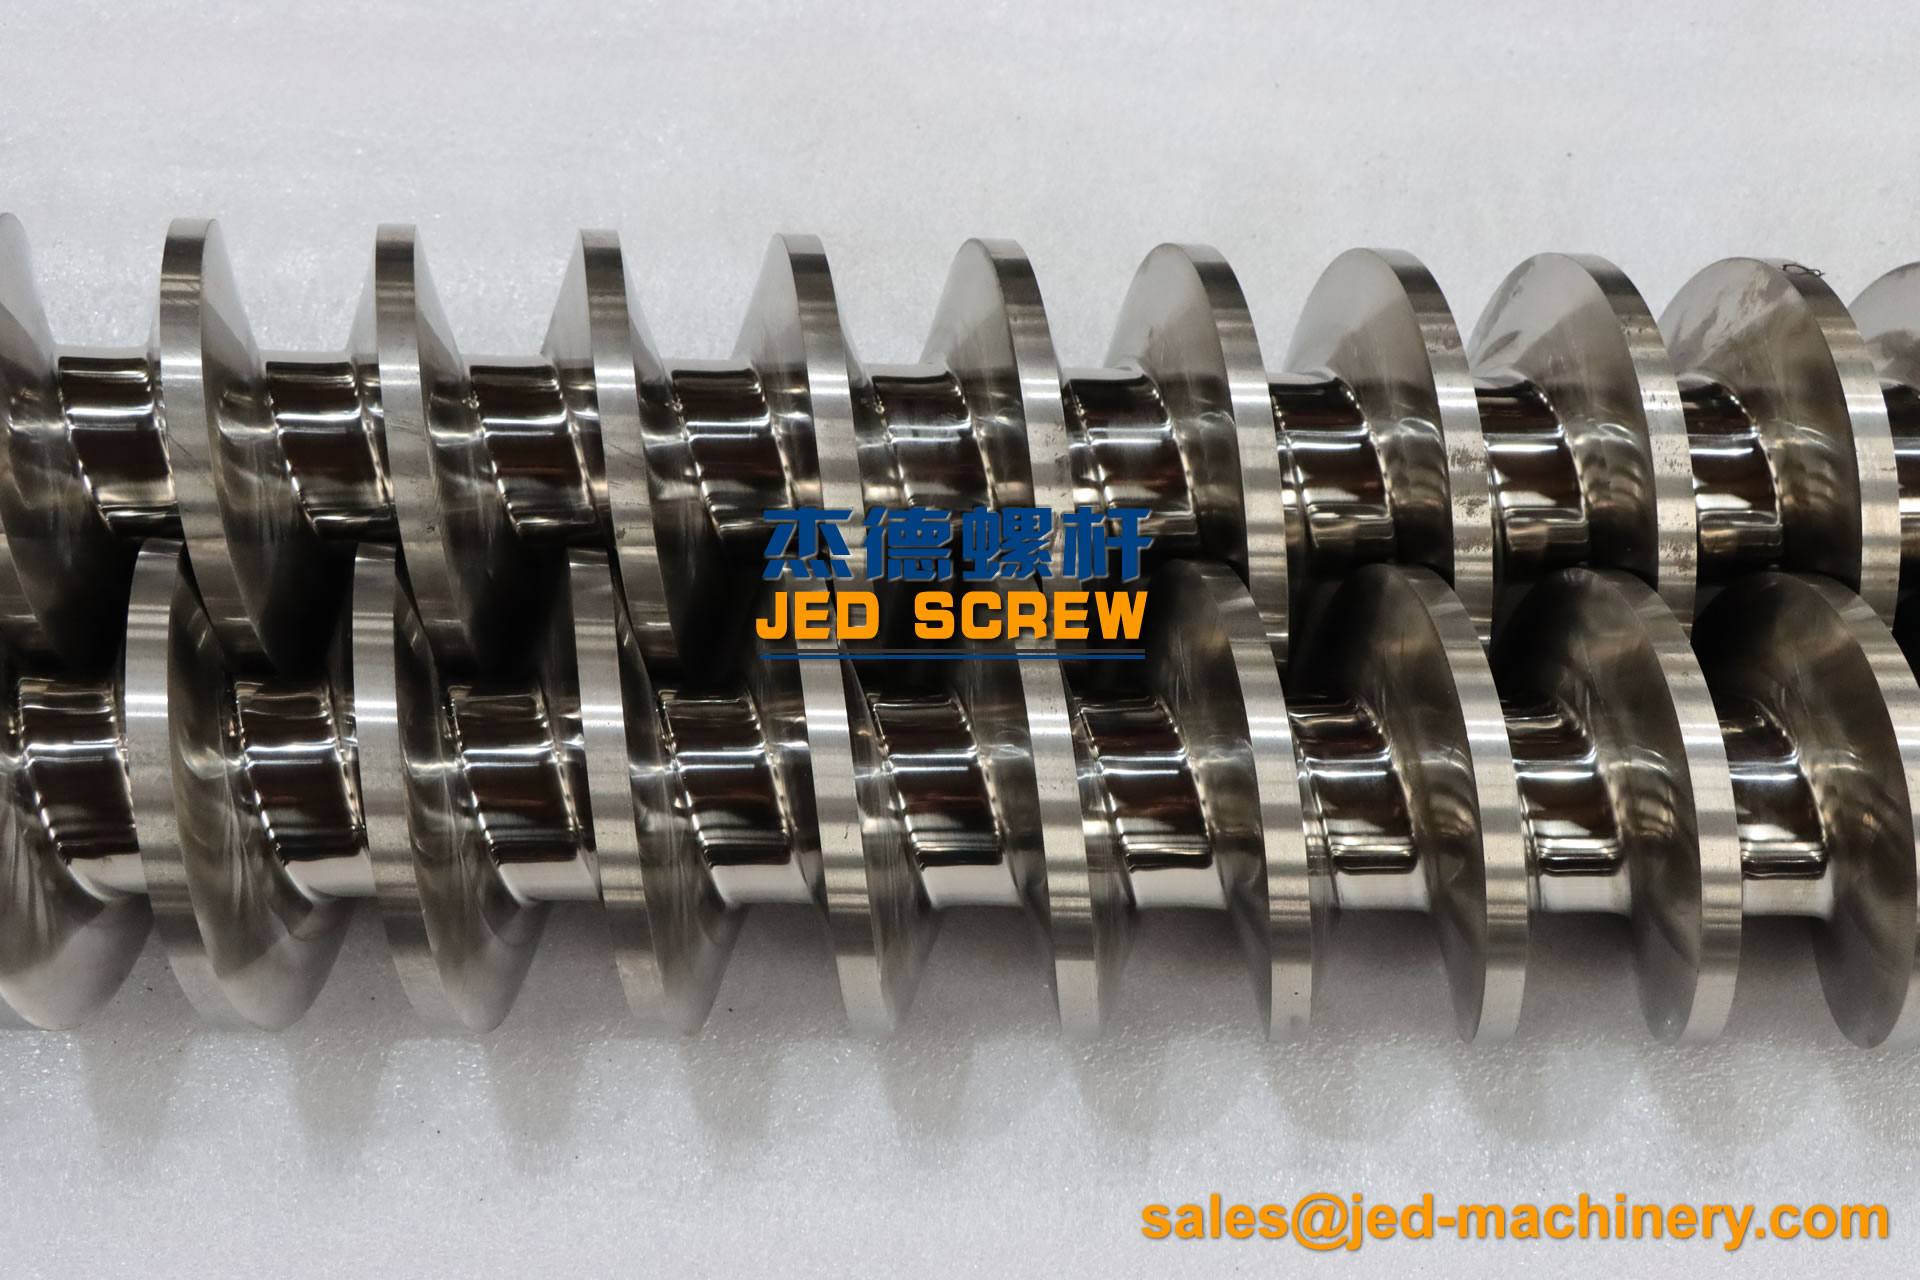 What is the cause of screw wear and the method to reduce wear - Industry News - 1